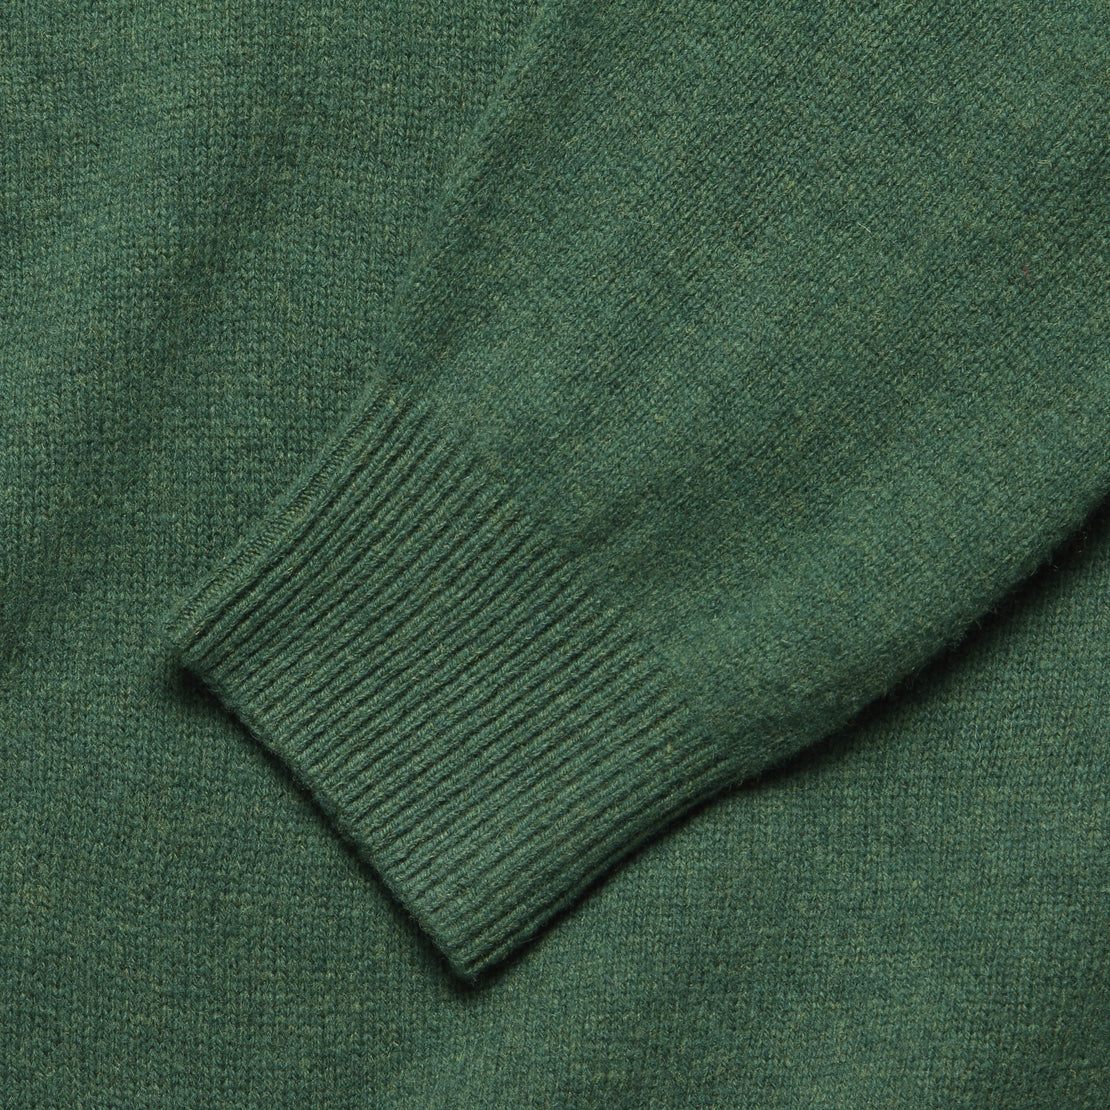 Merino Crew Sweater - Green - BEAMS+ - STAG Provisions - Tops - Sweater